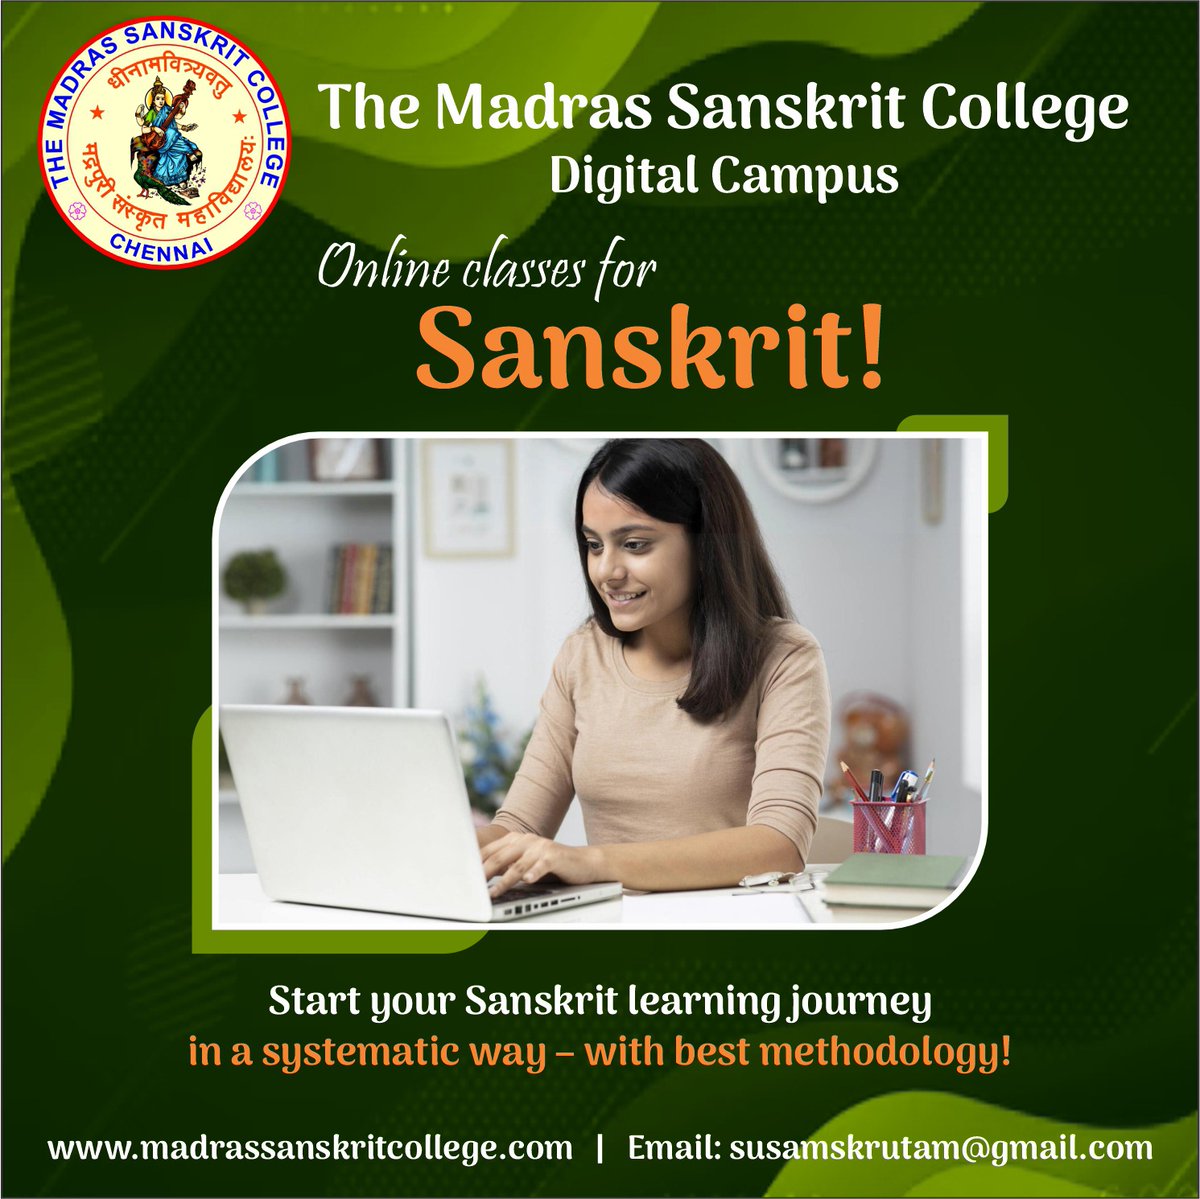 Make the best use of the summer holidays! learn Sanskrit the easy way. The Course starts on 18th May. Classes will be conducted on Wednesdays and Saturdays at 7:30pm every week. Link to join - madrassanskritcollege.com/courses/detail…